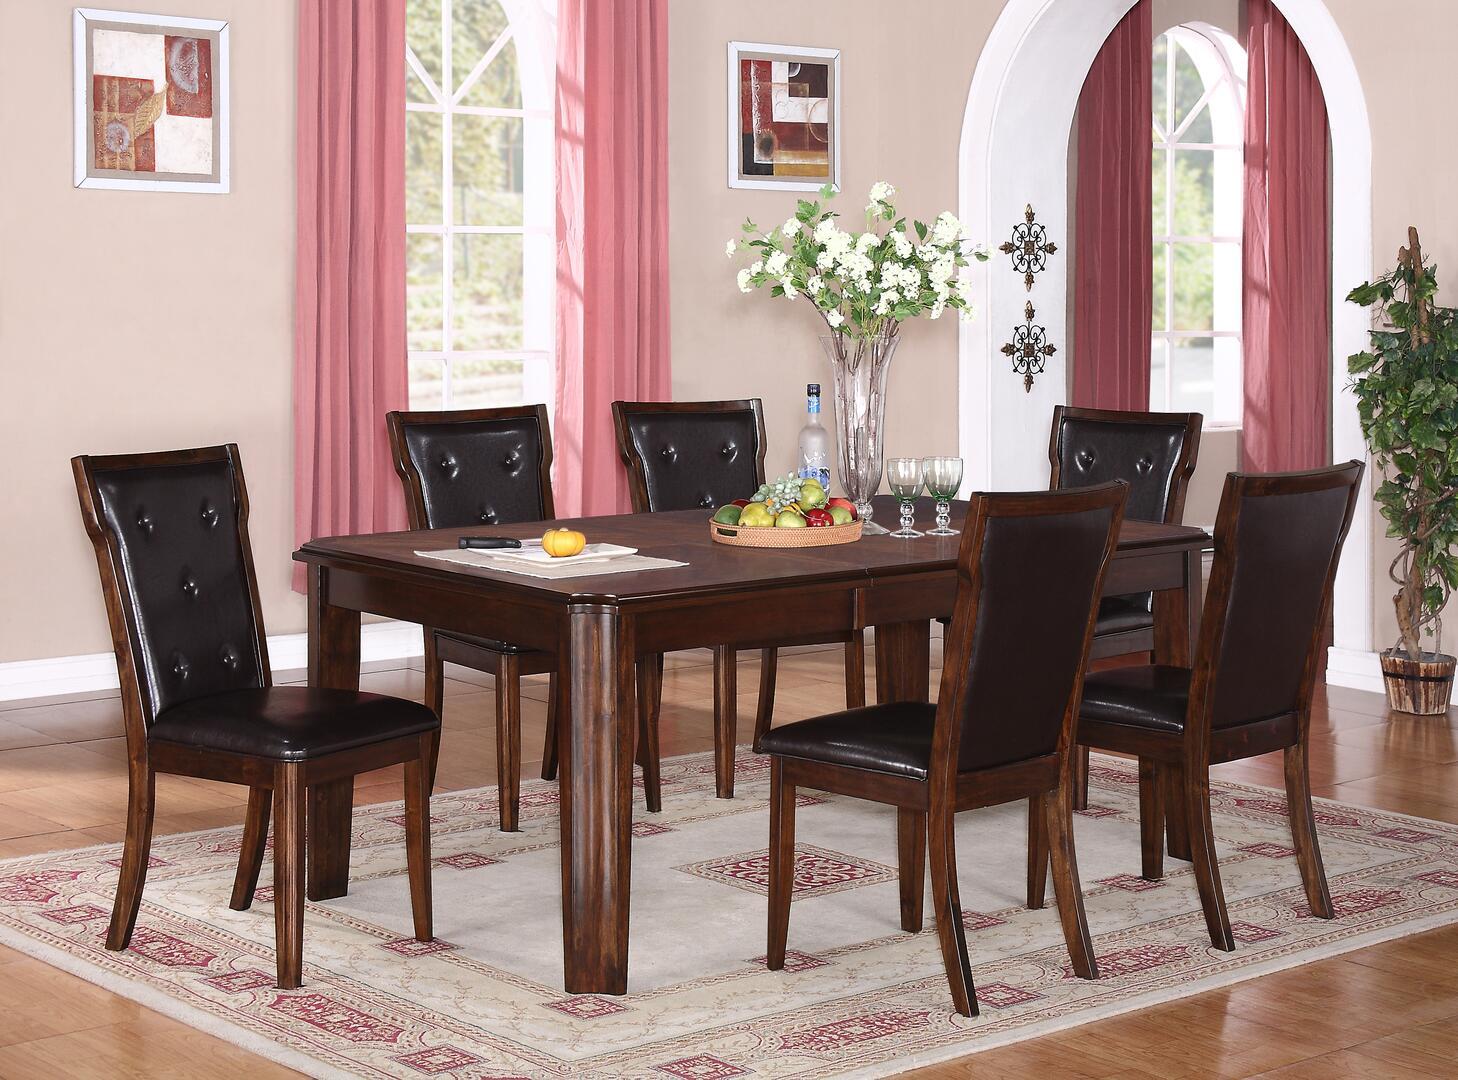 Transitional Dining Room Set Pam Pam-Set-8 in Espresso Faux Leather